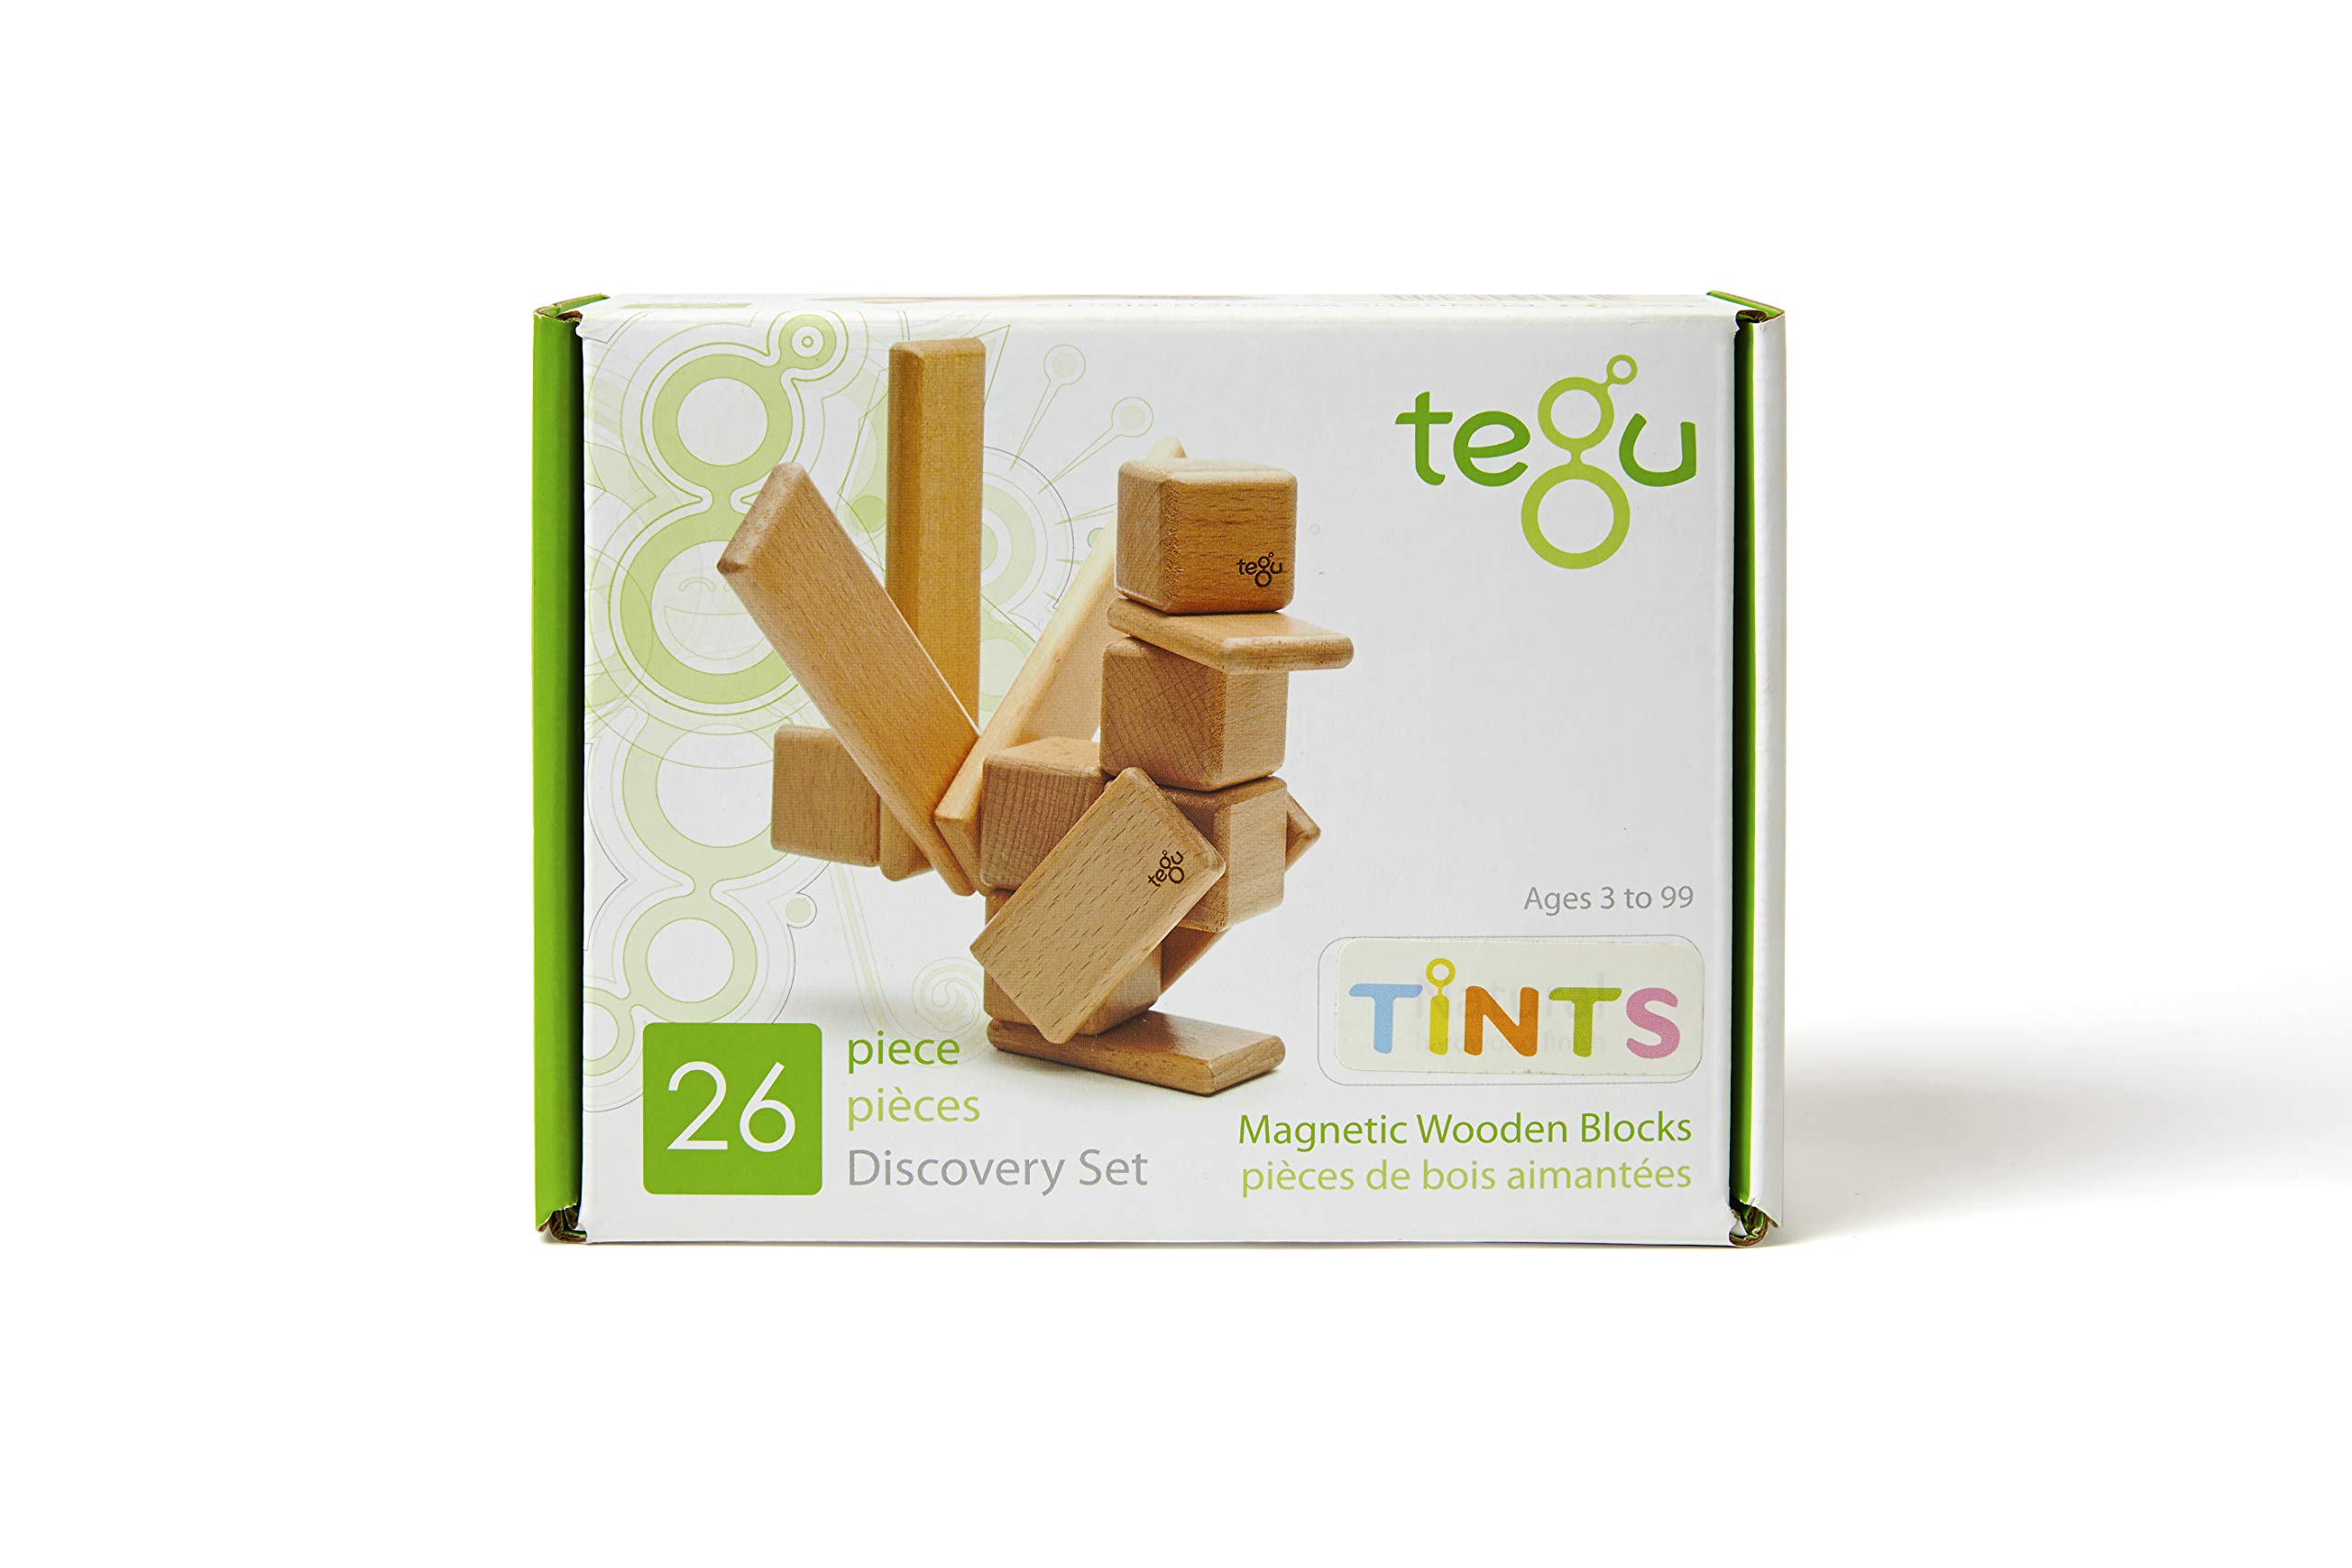 26 Piece Tegu Discovery Magnetic Wooden Block Set,1-99 years old, Tints